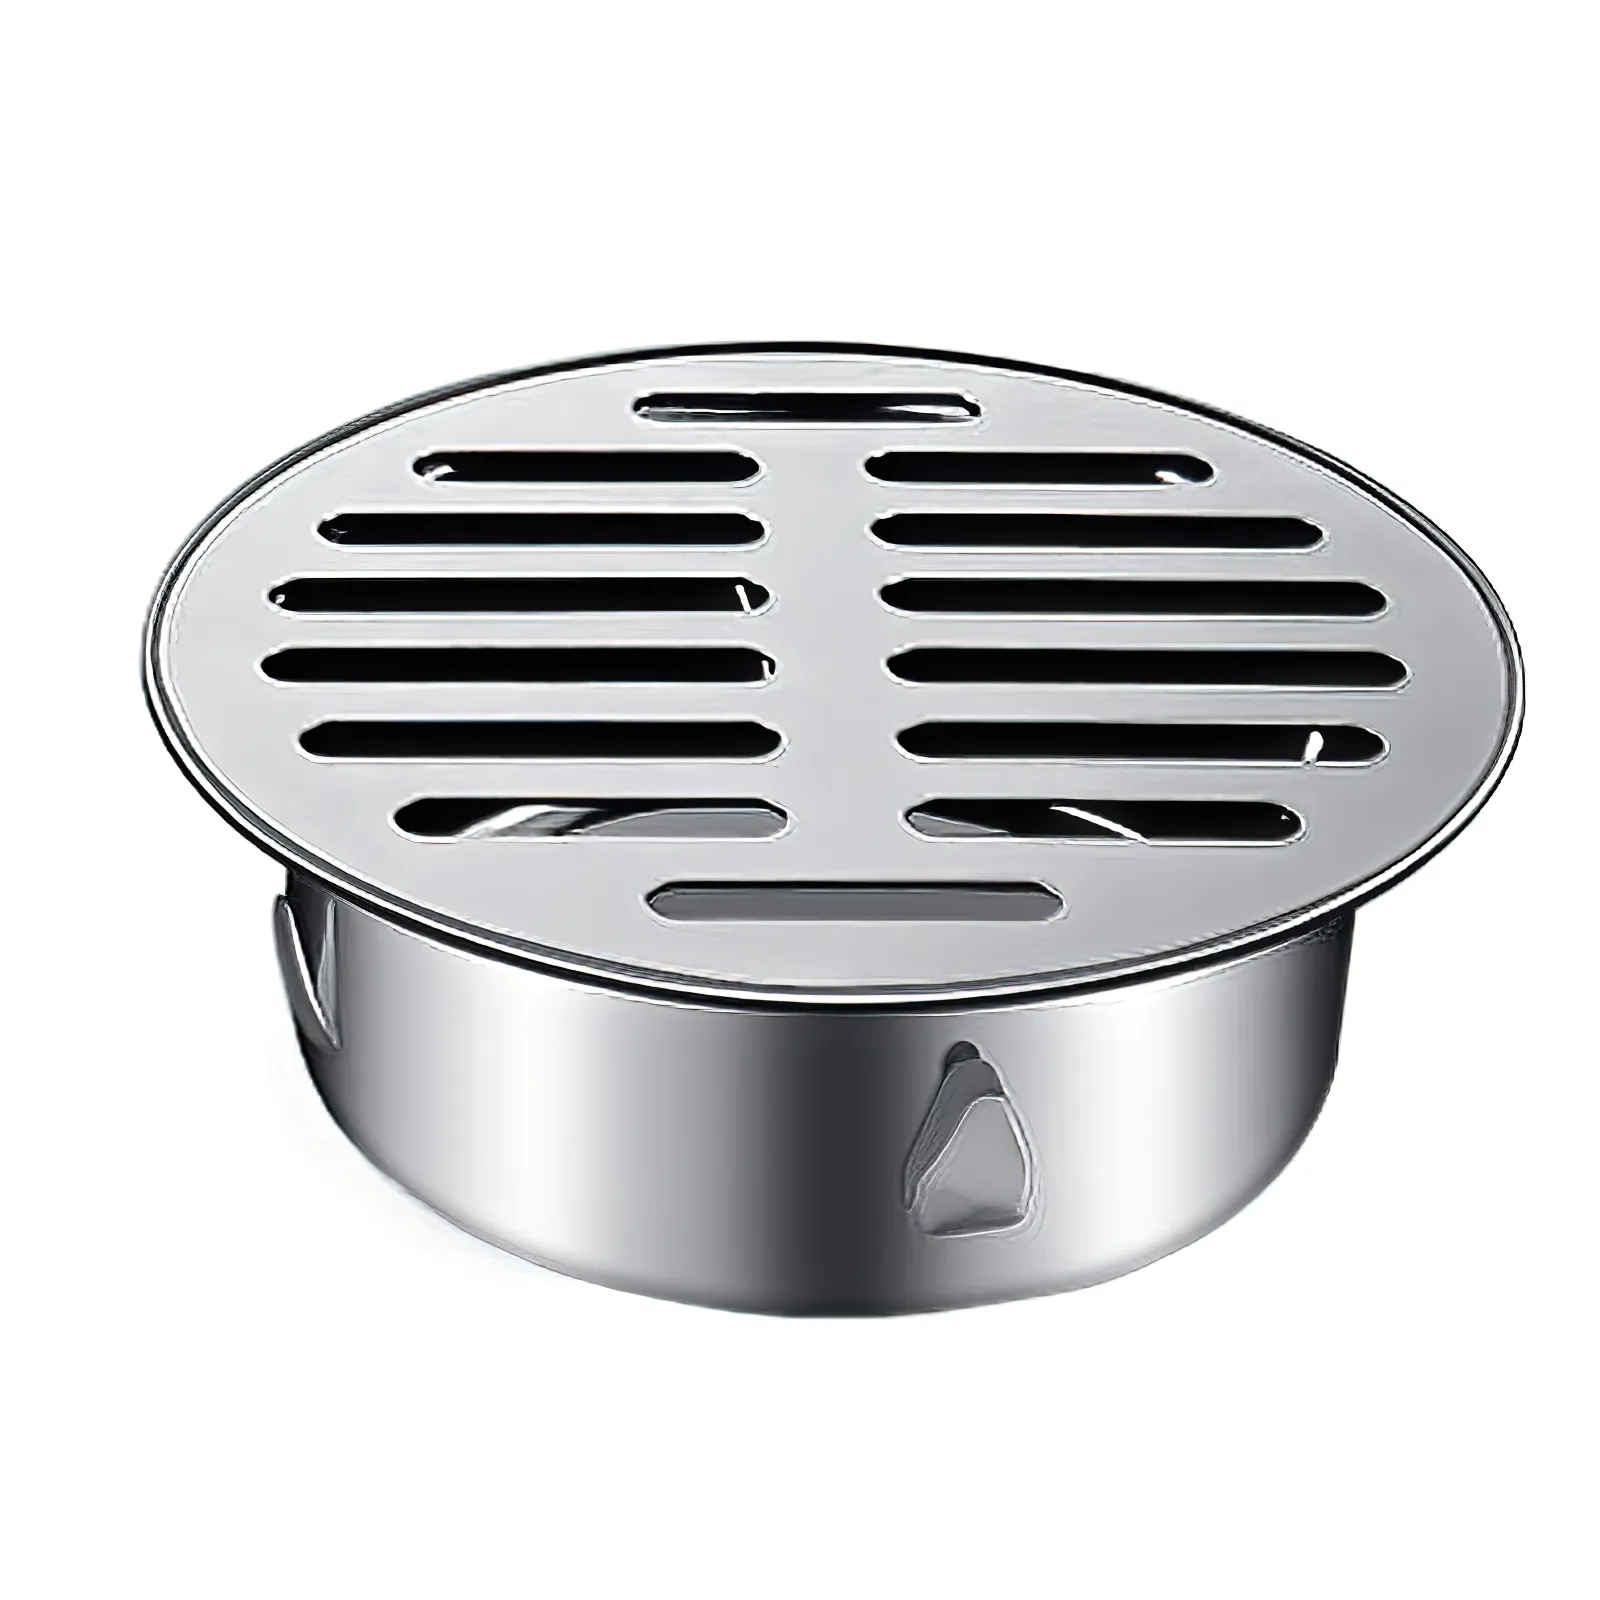 Bathroom Floor Drain SUS304 Stainless Steel Anti-clogging Round Sink Removable Strainer Stopper for Kitchen Shower Drain Pipe